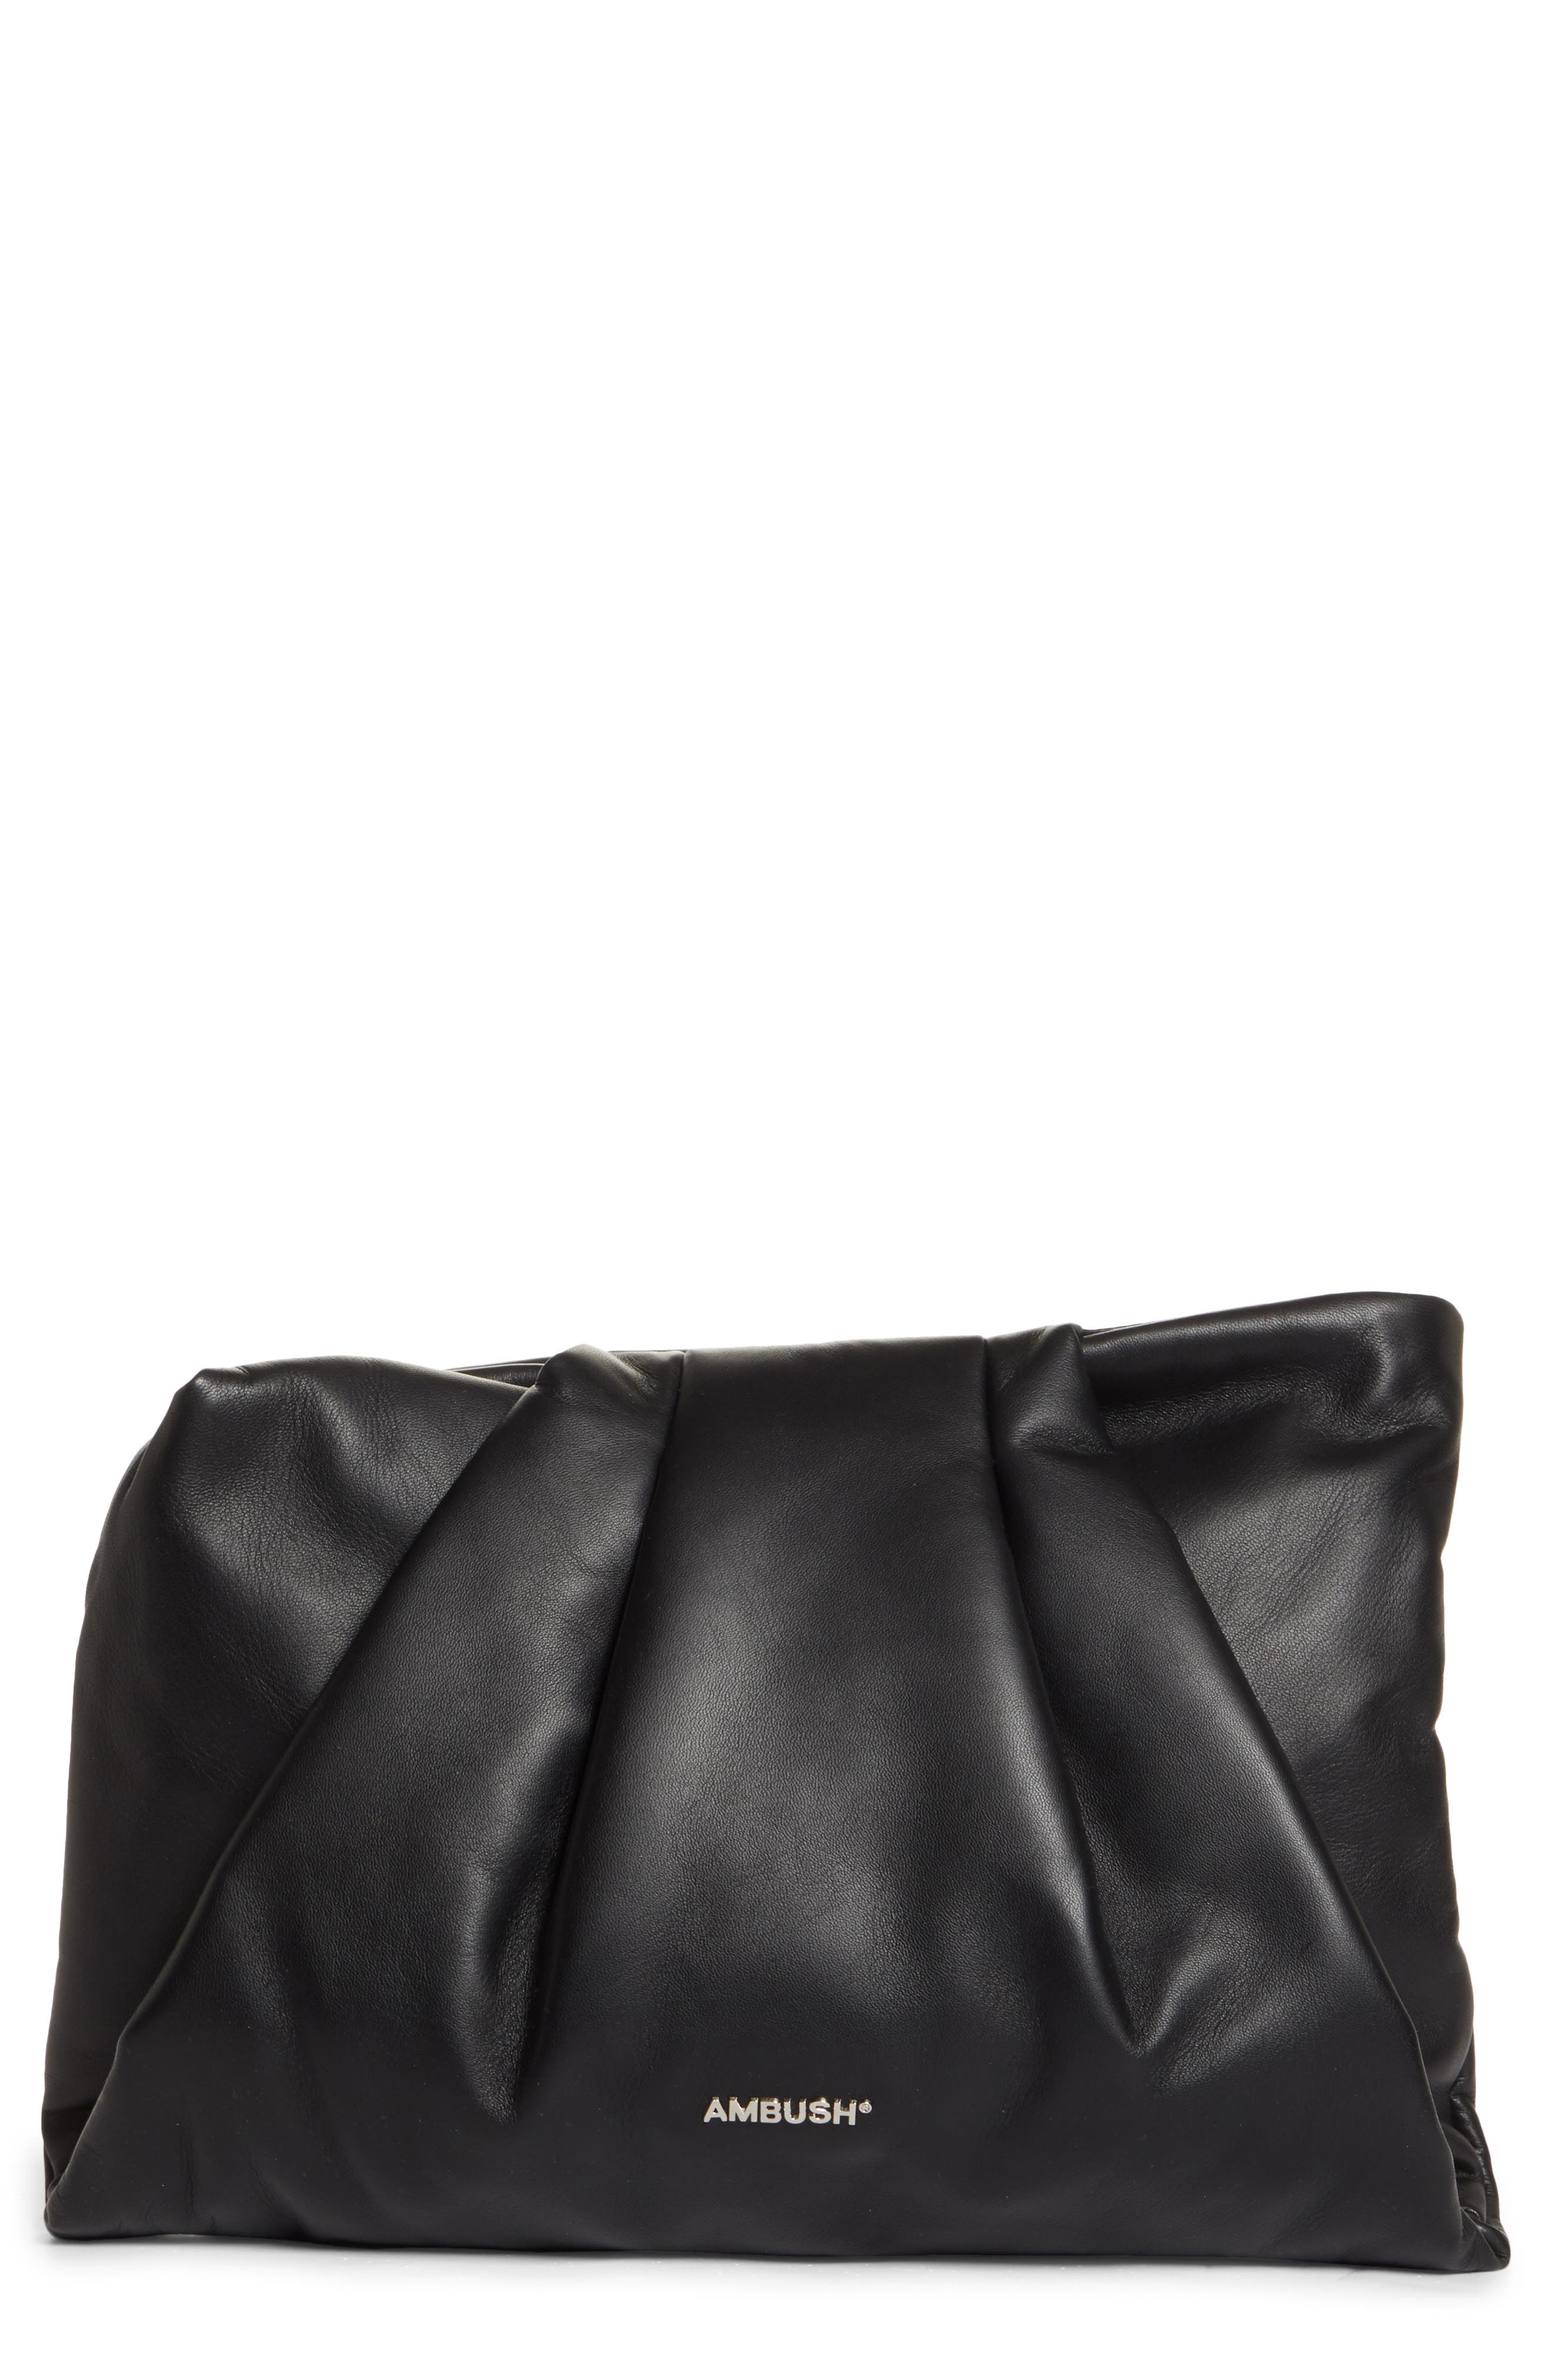 Ambush Wrap Leather Clutch in Black Silver 1072 at Nordstrom